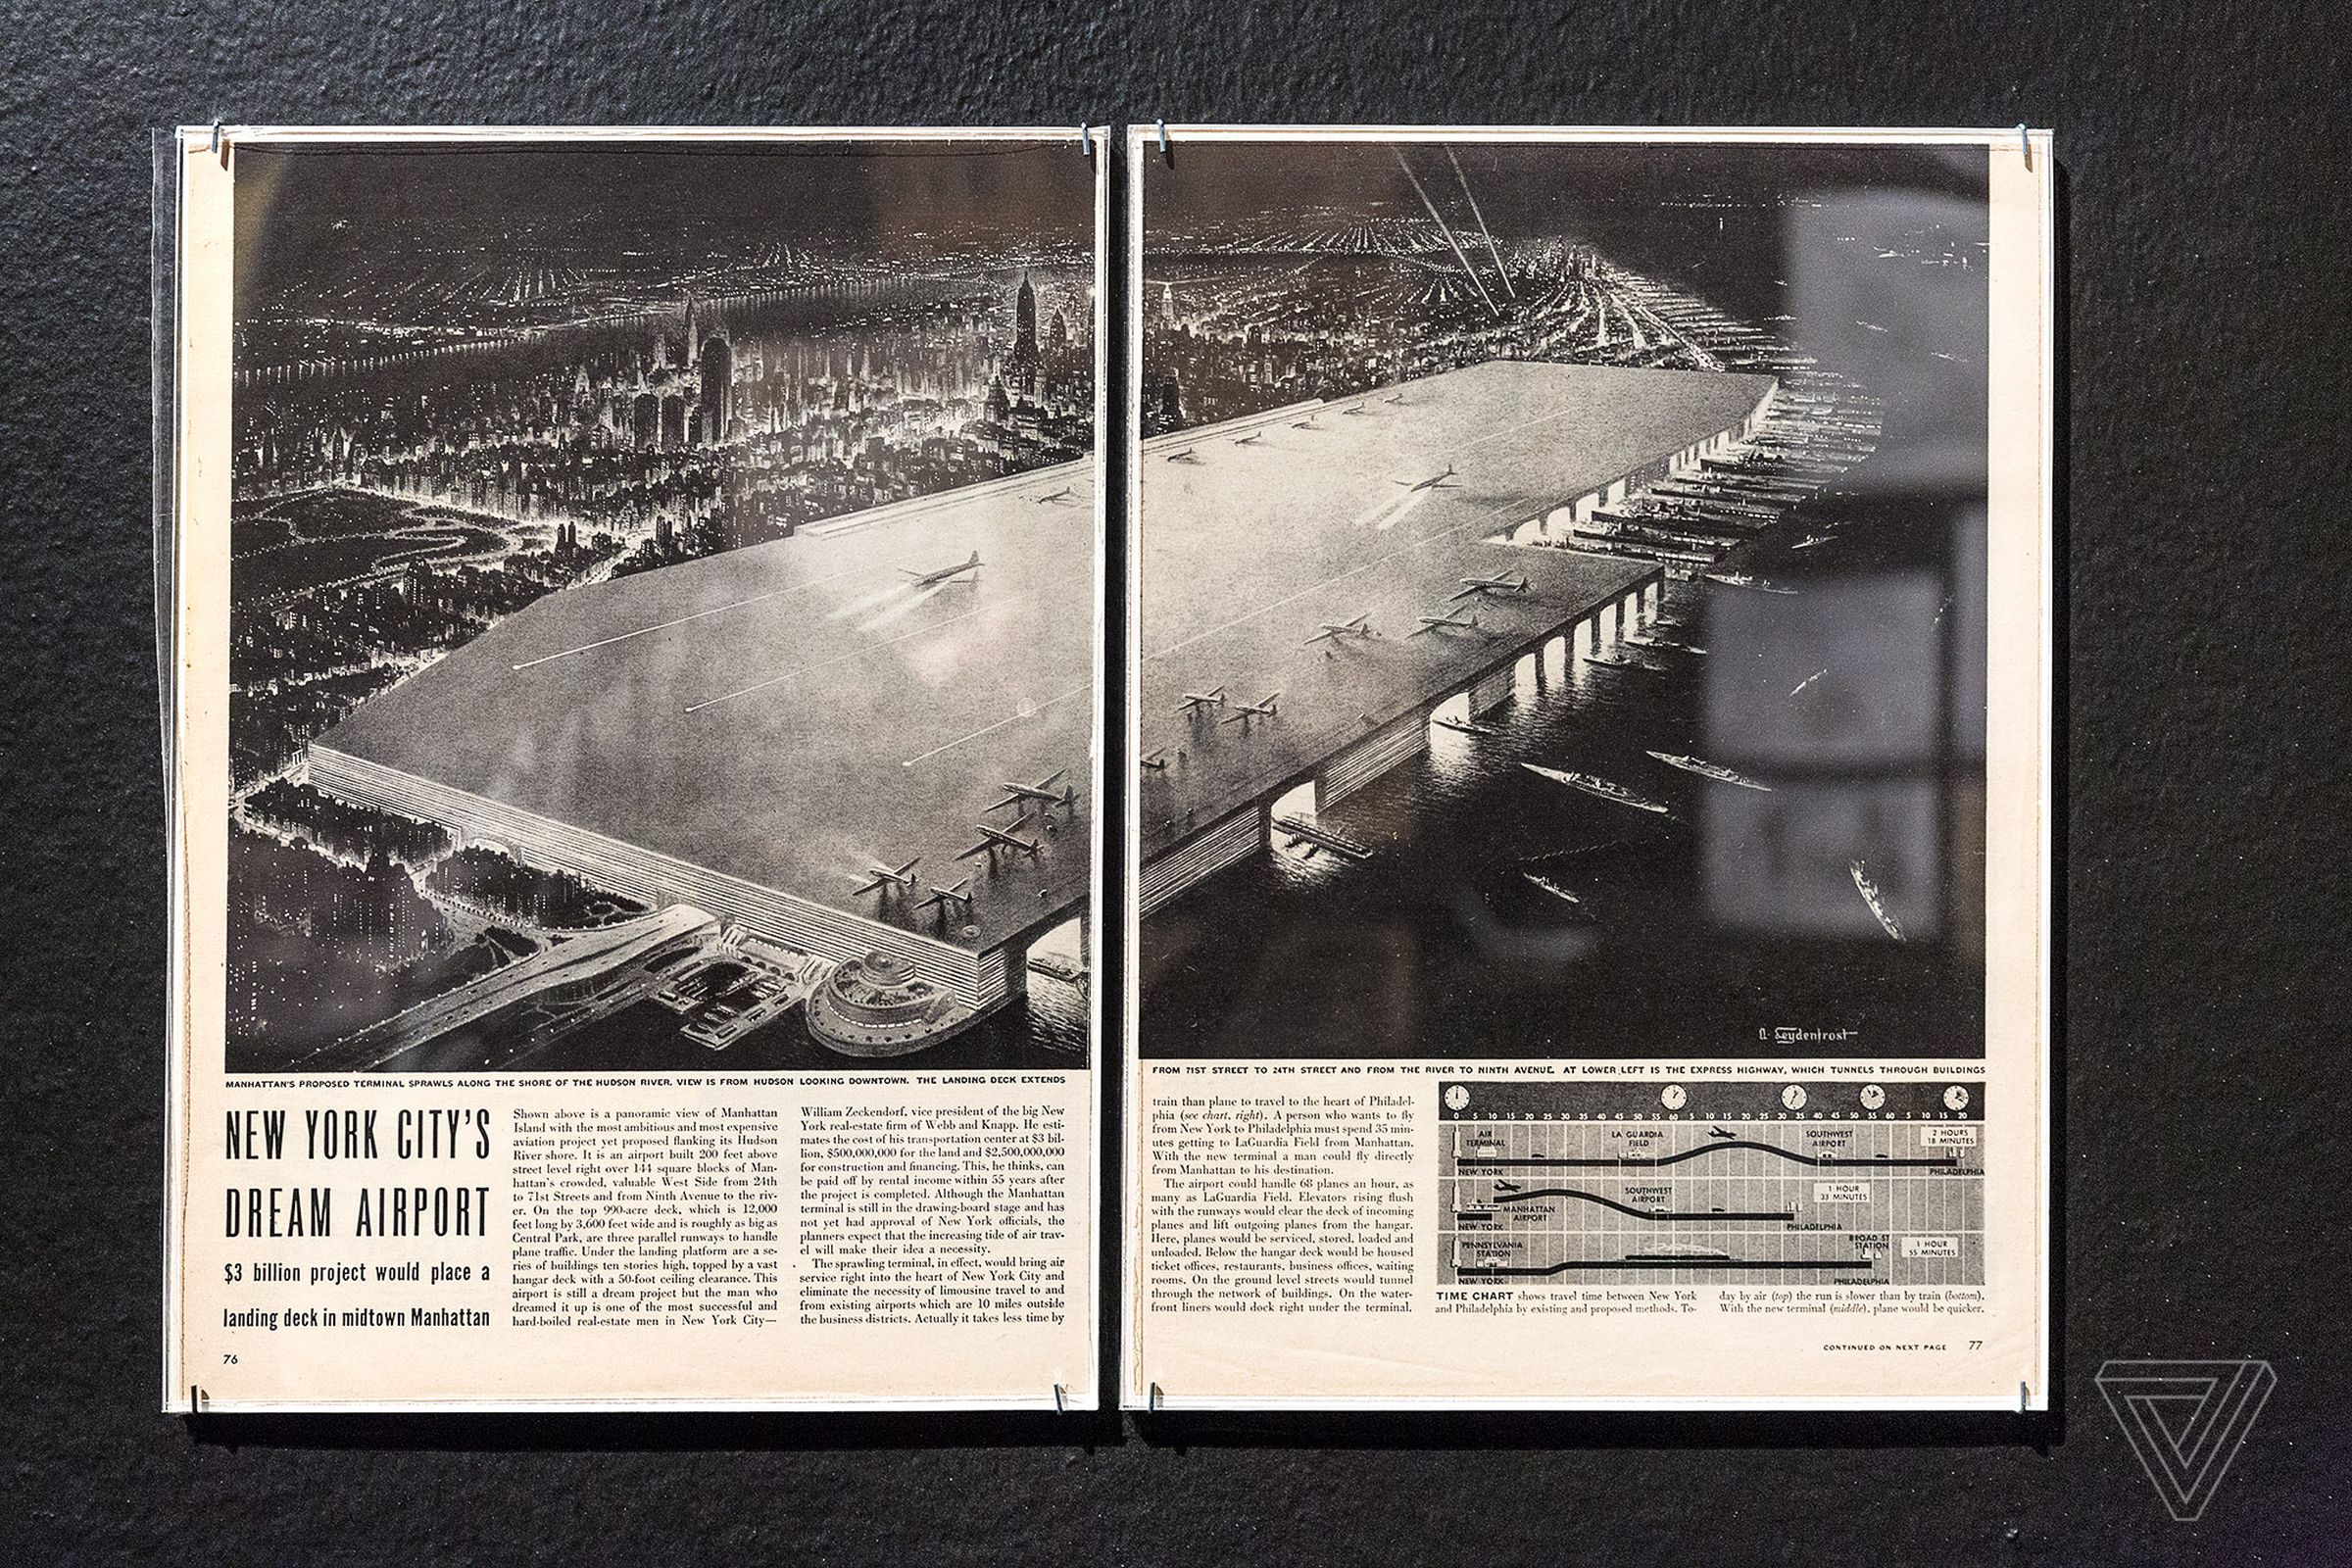 Zeckendorf’s airport idea was covered in the December 1945 issue of Life, described as a “dream.” Okay, sure! Steel columns would suspend the airport 200 feet above street level from 24th street to 71st street, from 9th avenue into the river. 